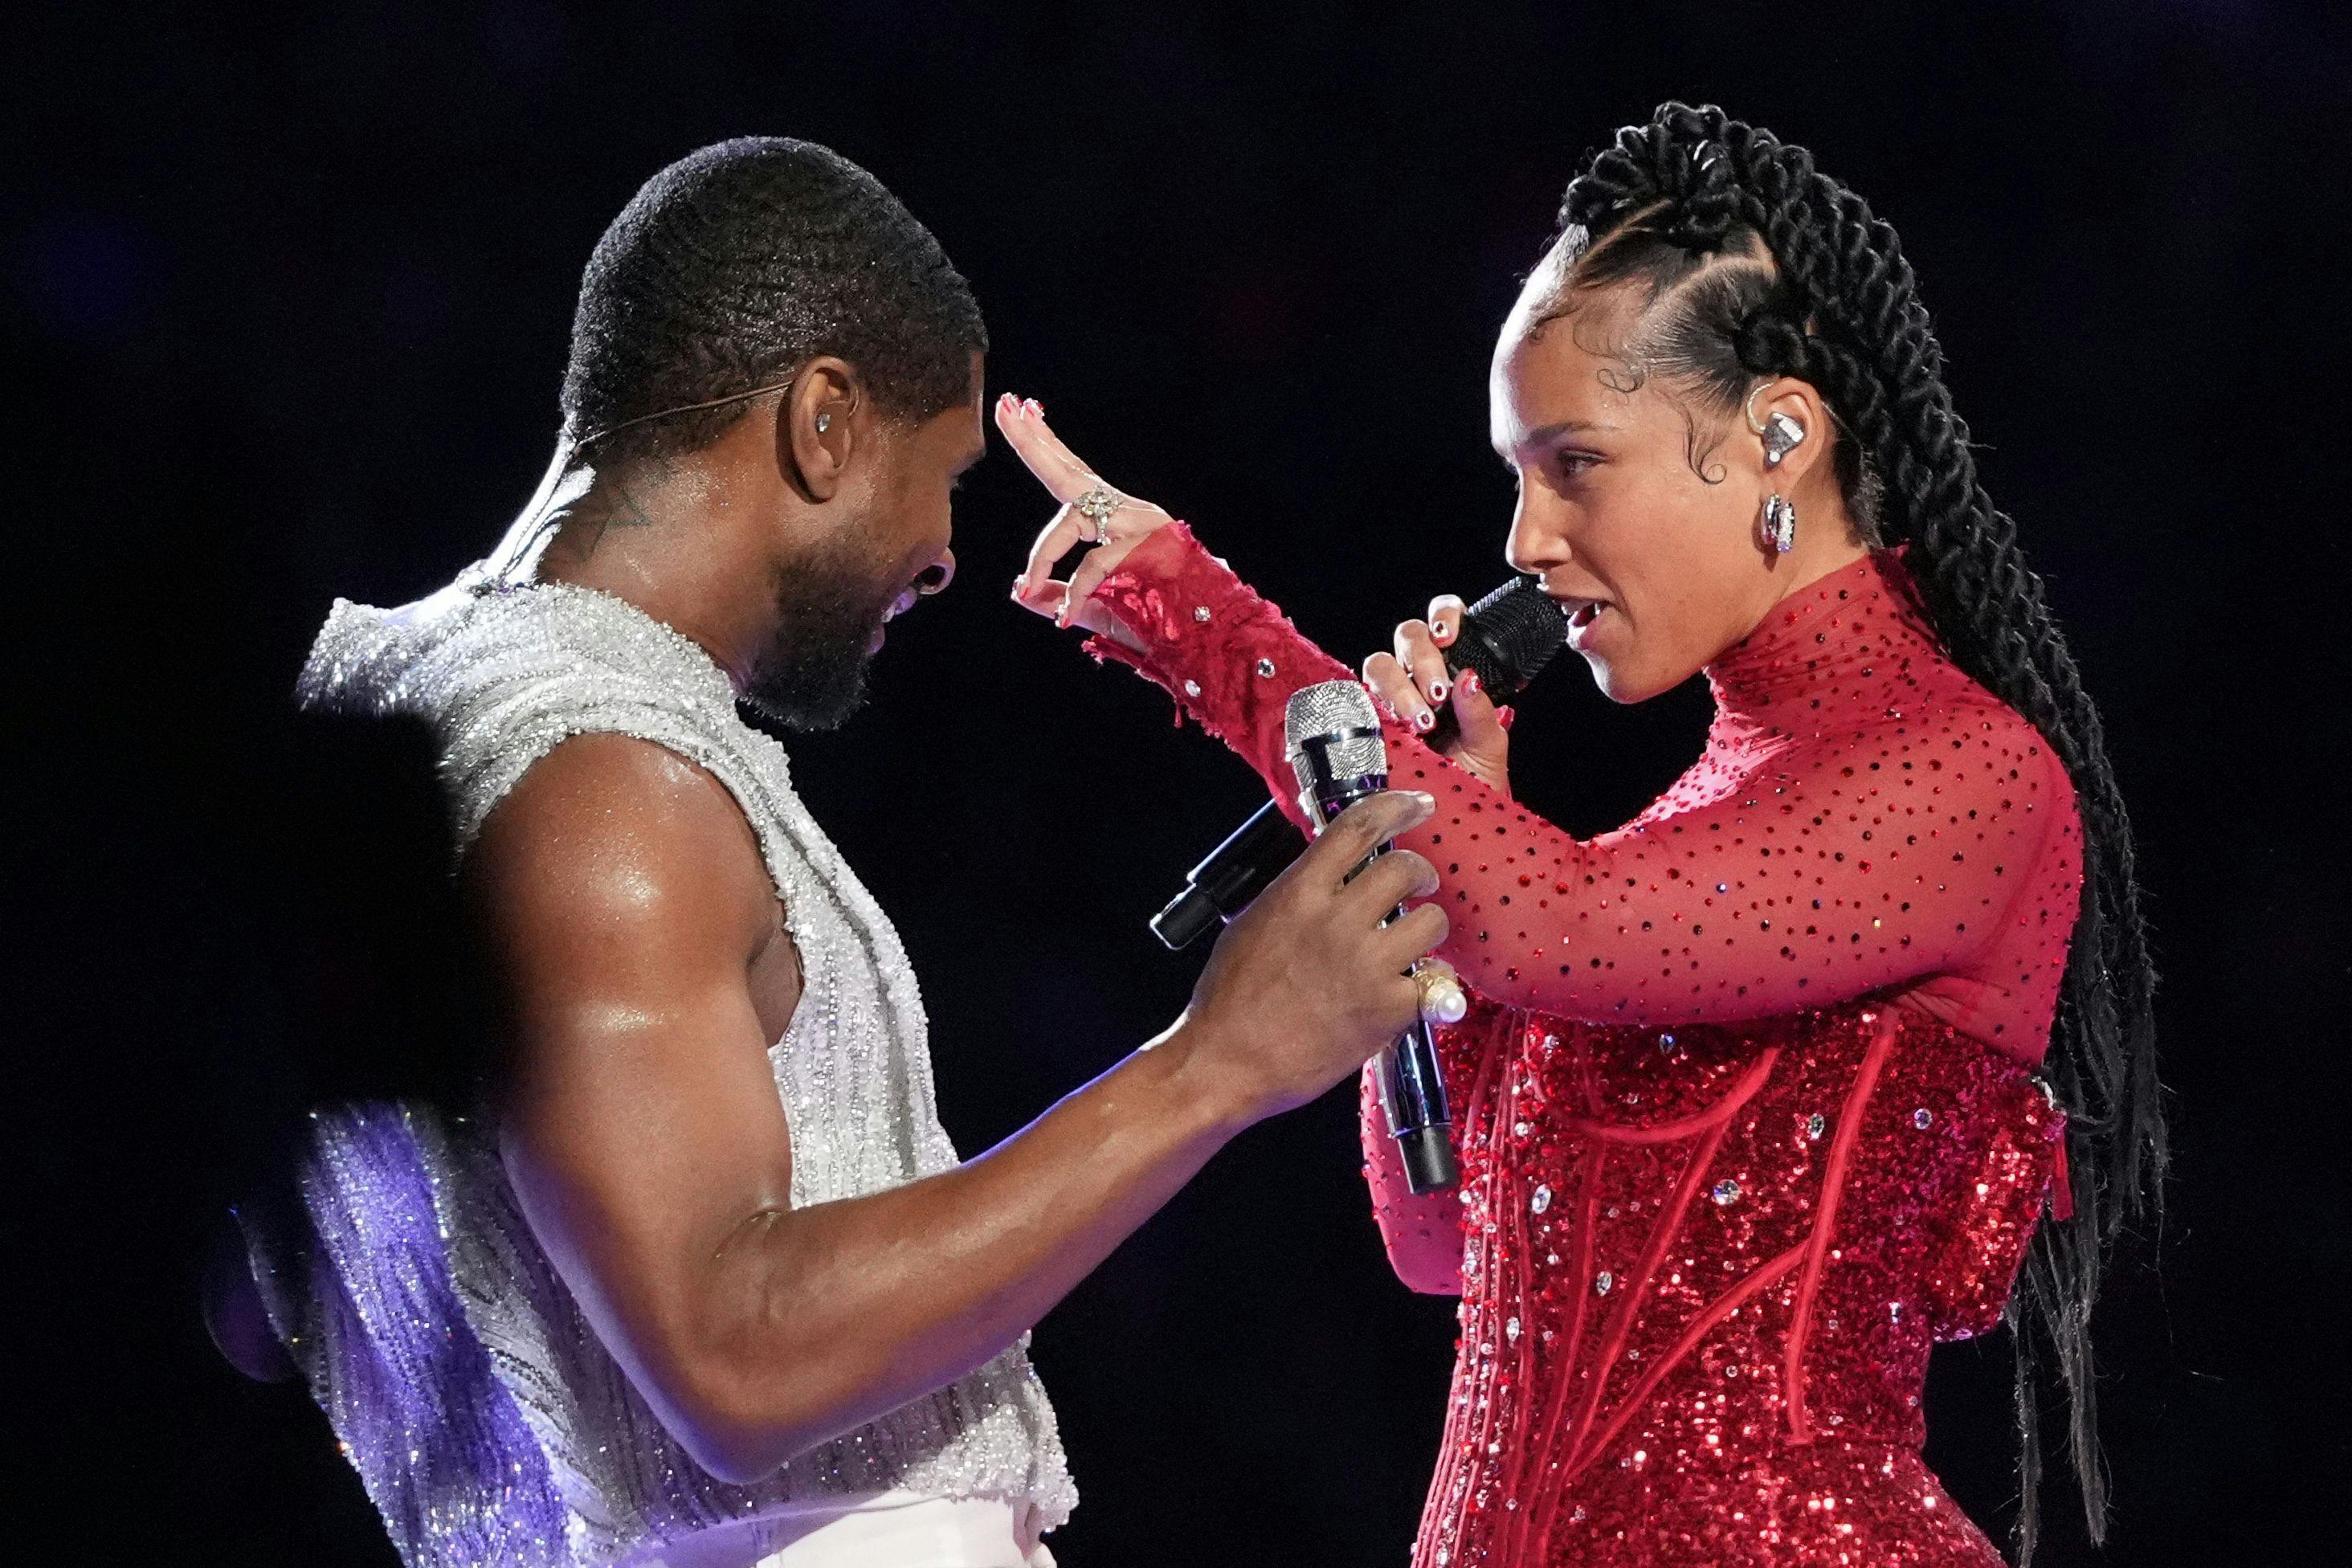 US singer-songwriter Usher performs with US singer-songwriter Alicia Keys (R) during Apple Music halftime show of Super Bowl LVIII between the Kansas City Chiefs and the San Francisco 49ers at Allegiant Stadium in Las Vegas, Nevada, February 11, 2024. (Photo by TIMOTHY A. CLARY / AFP)